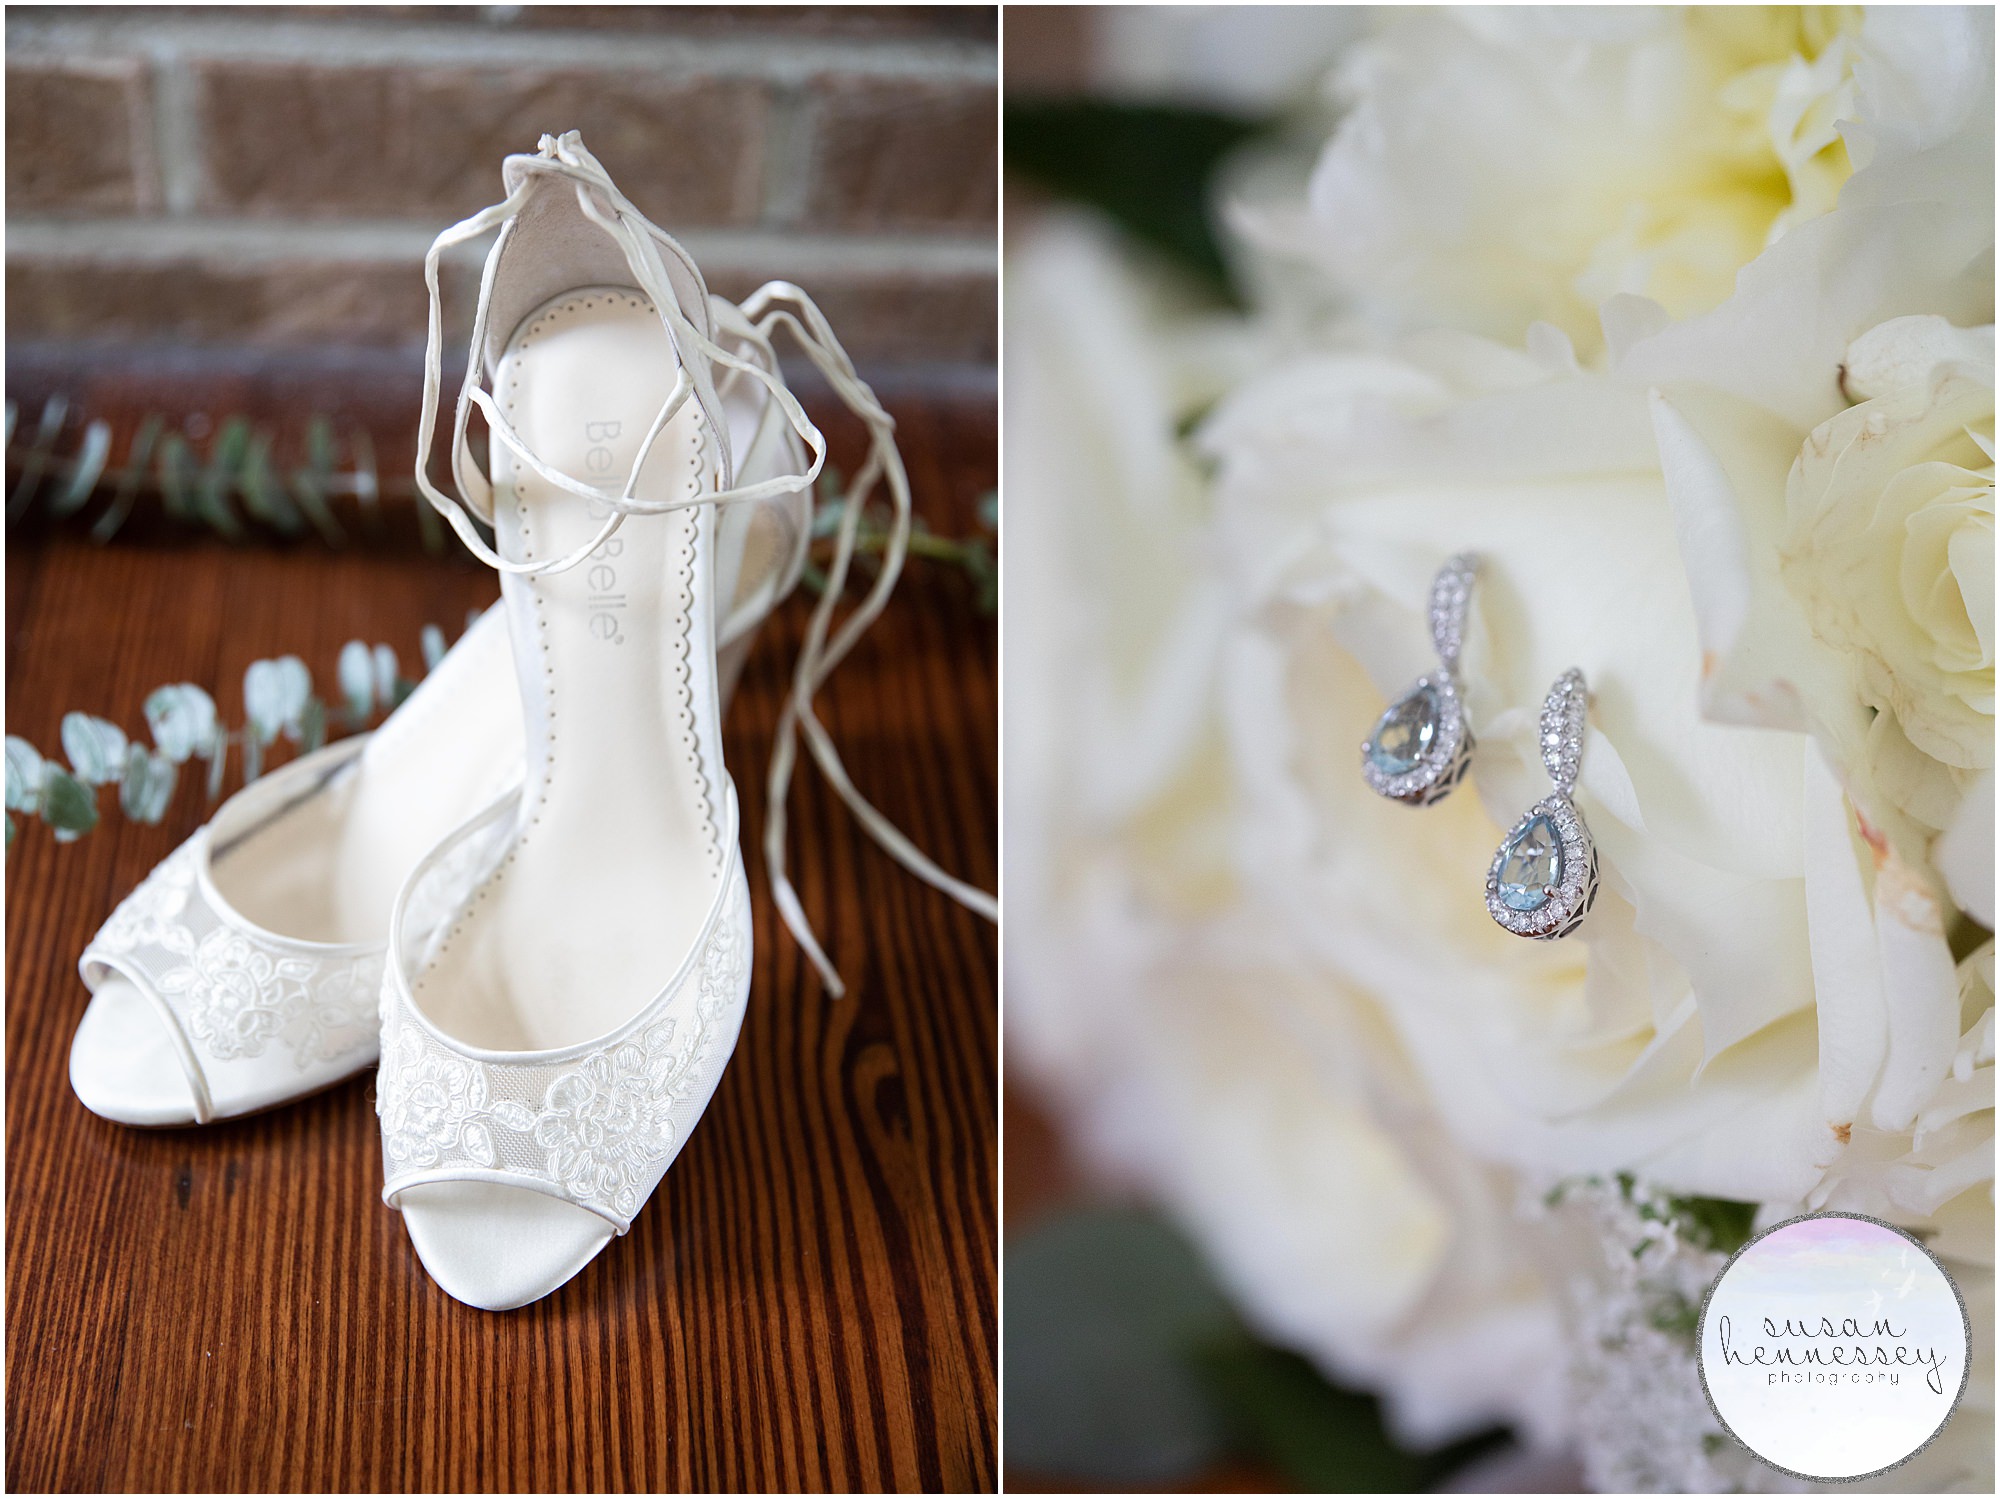 Bridal shoes and earrings.